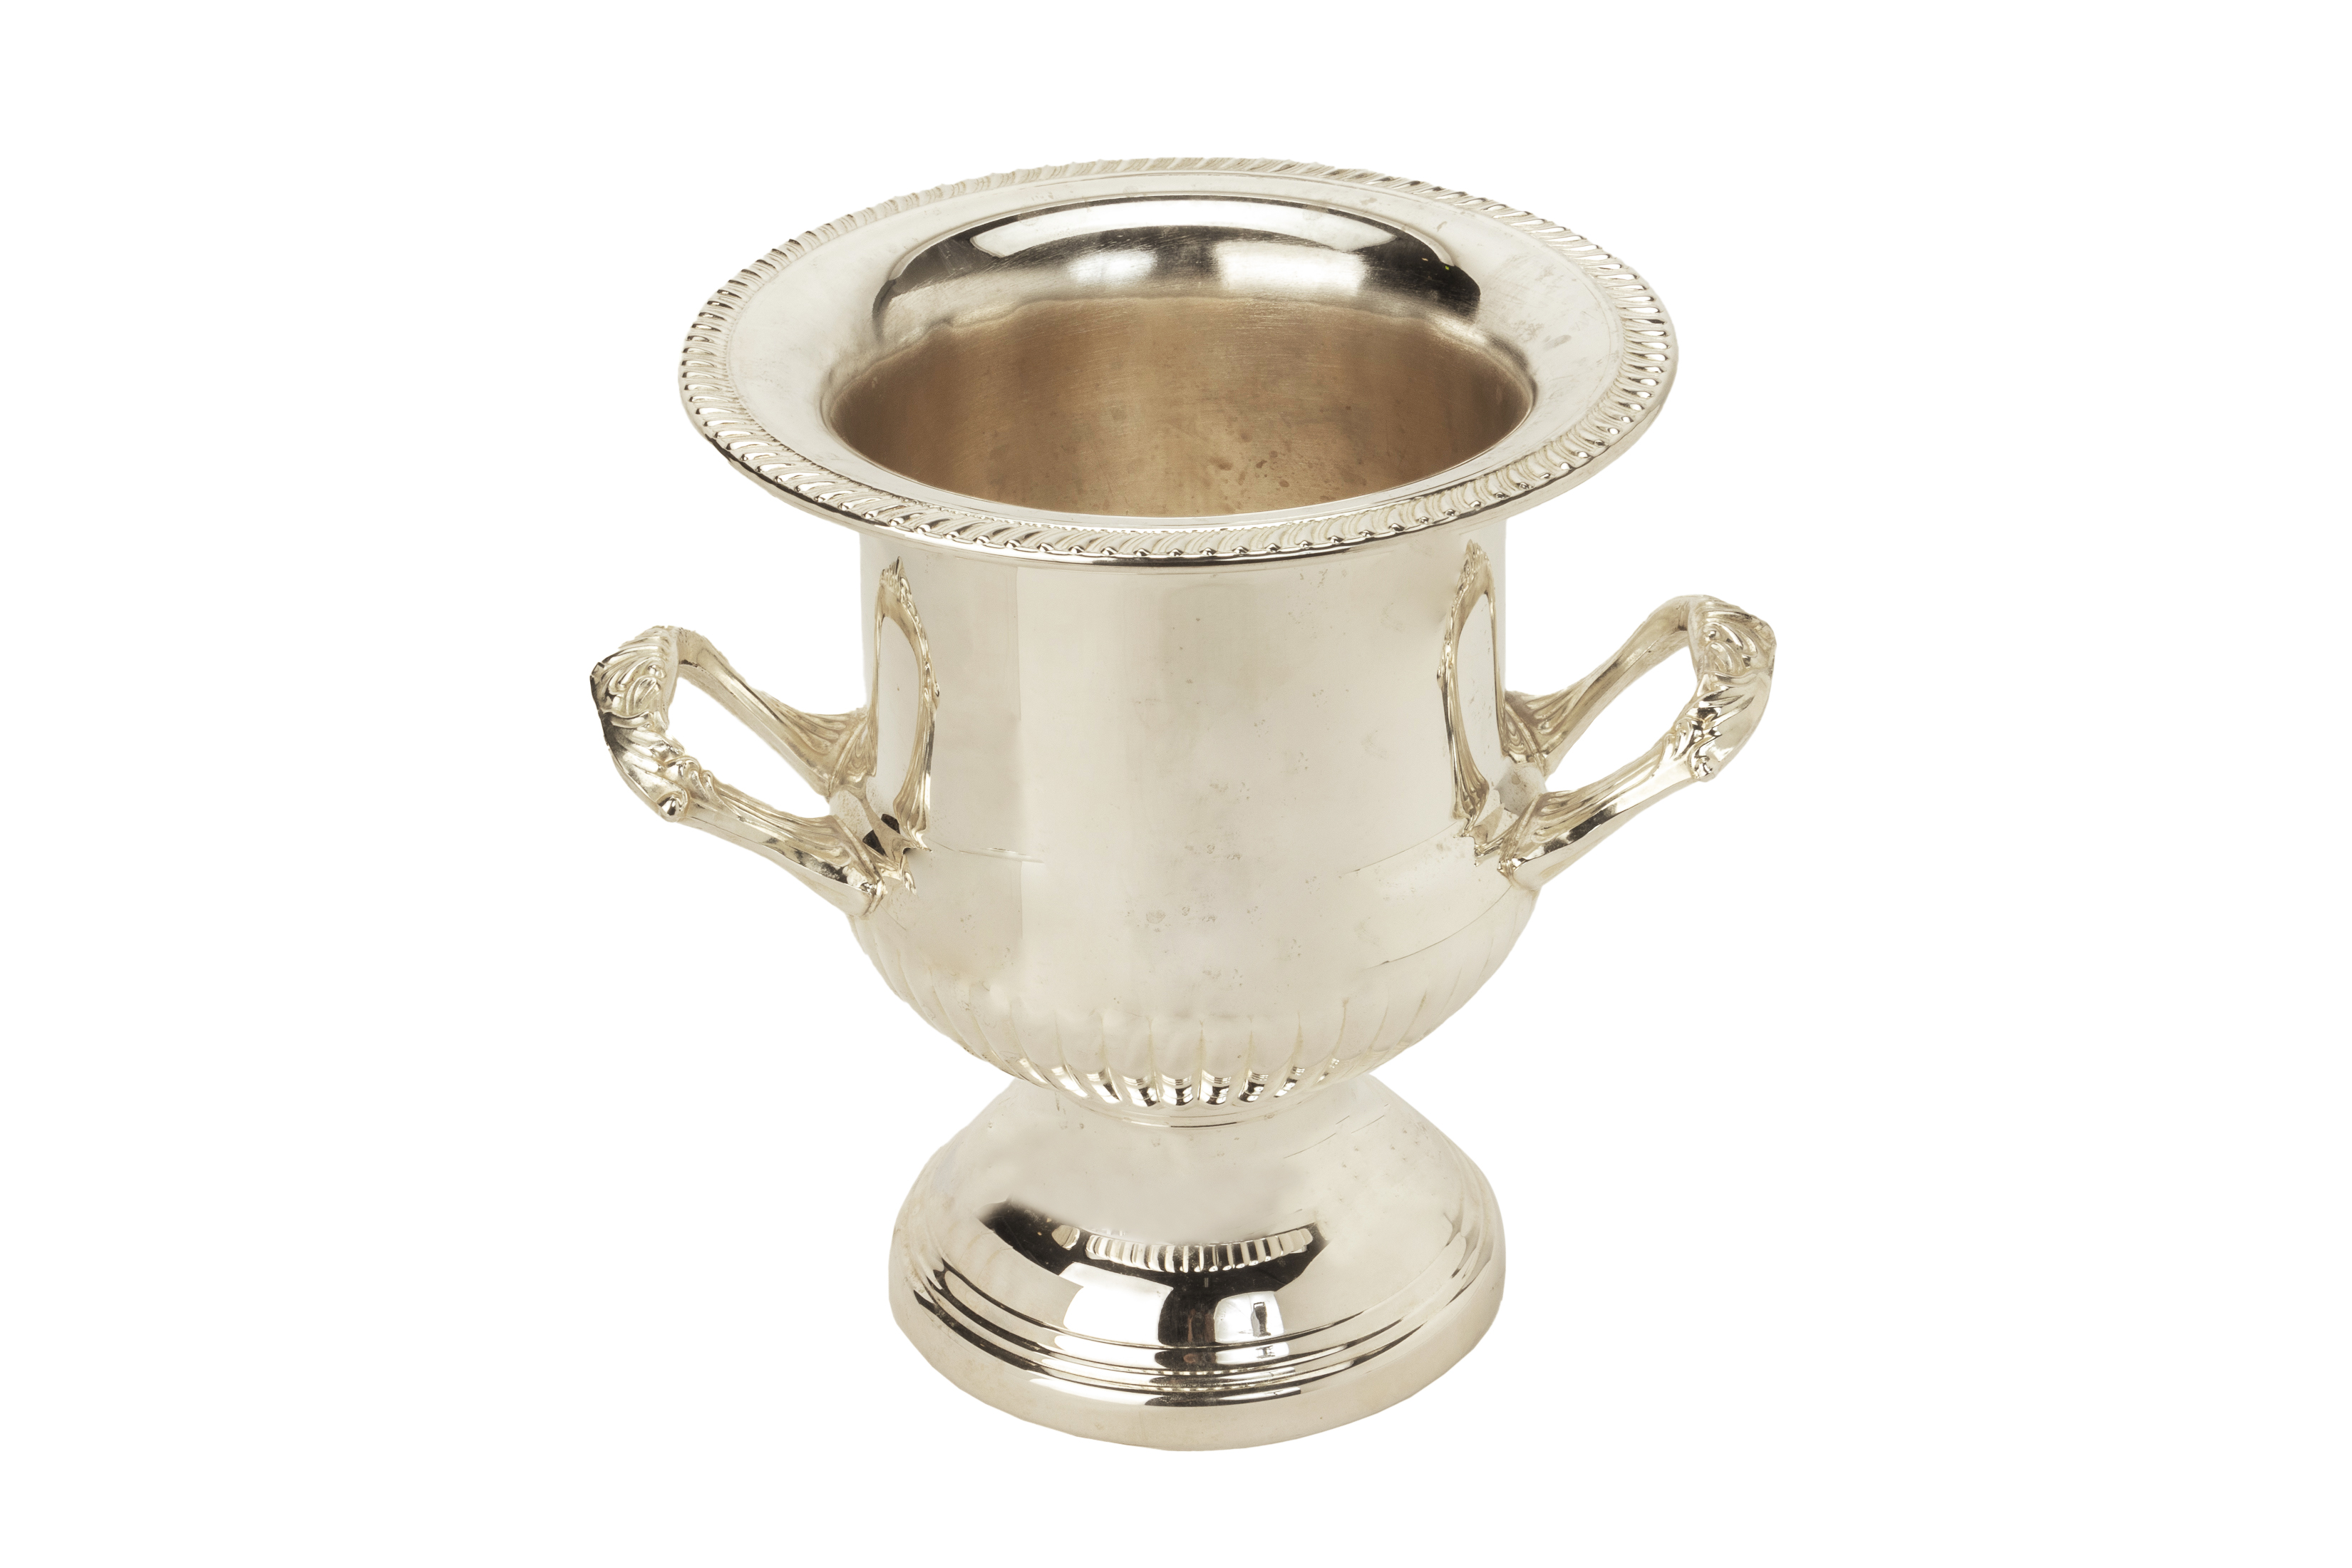 A TWIN HANDLED SILVER PLATED WINE COOLER